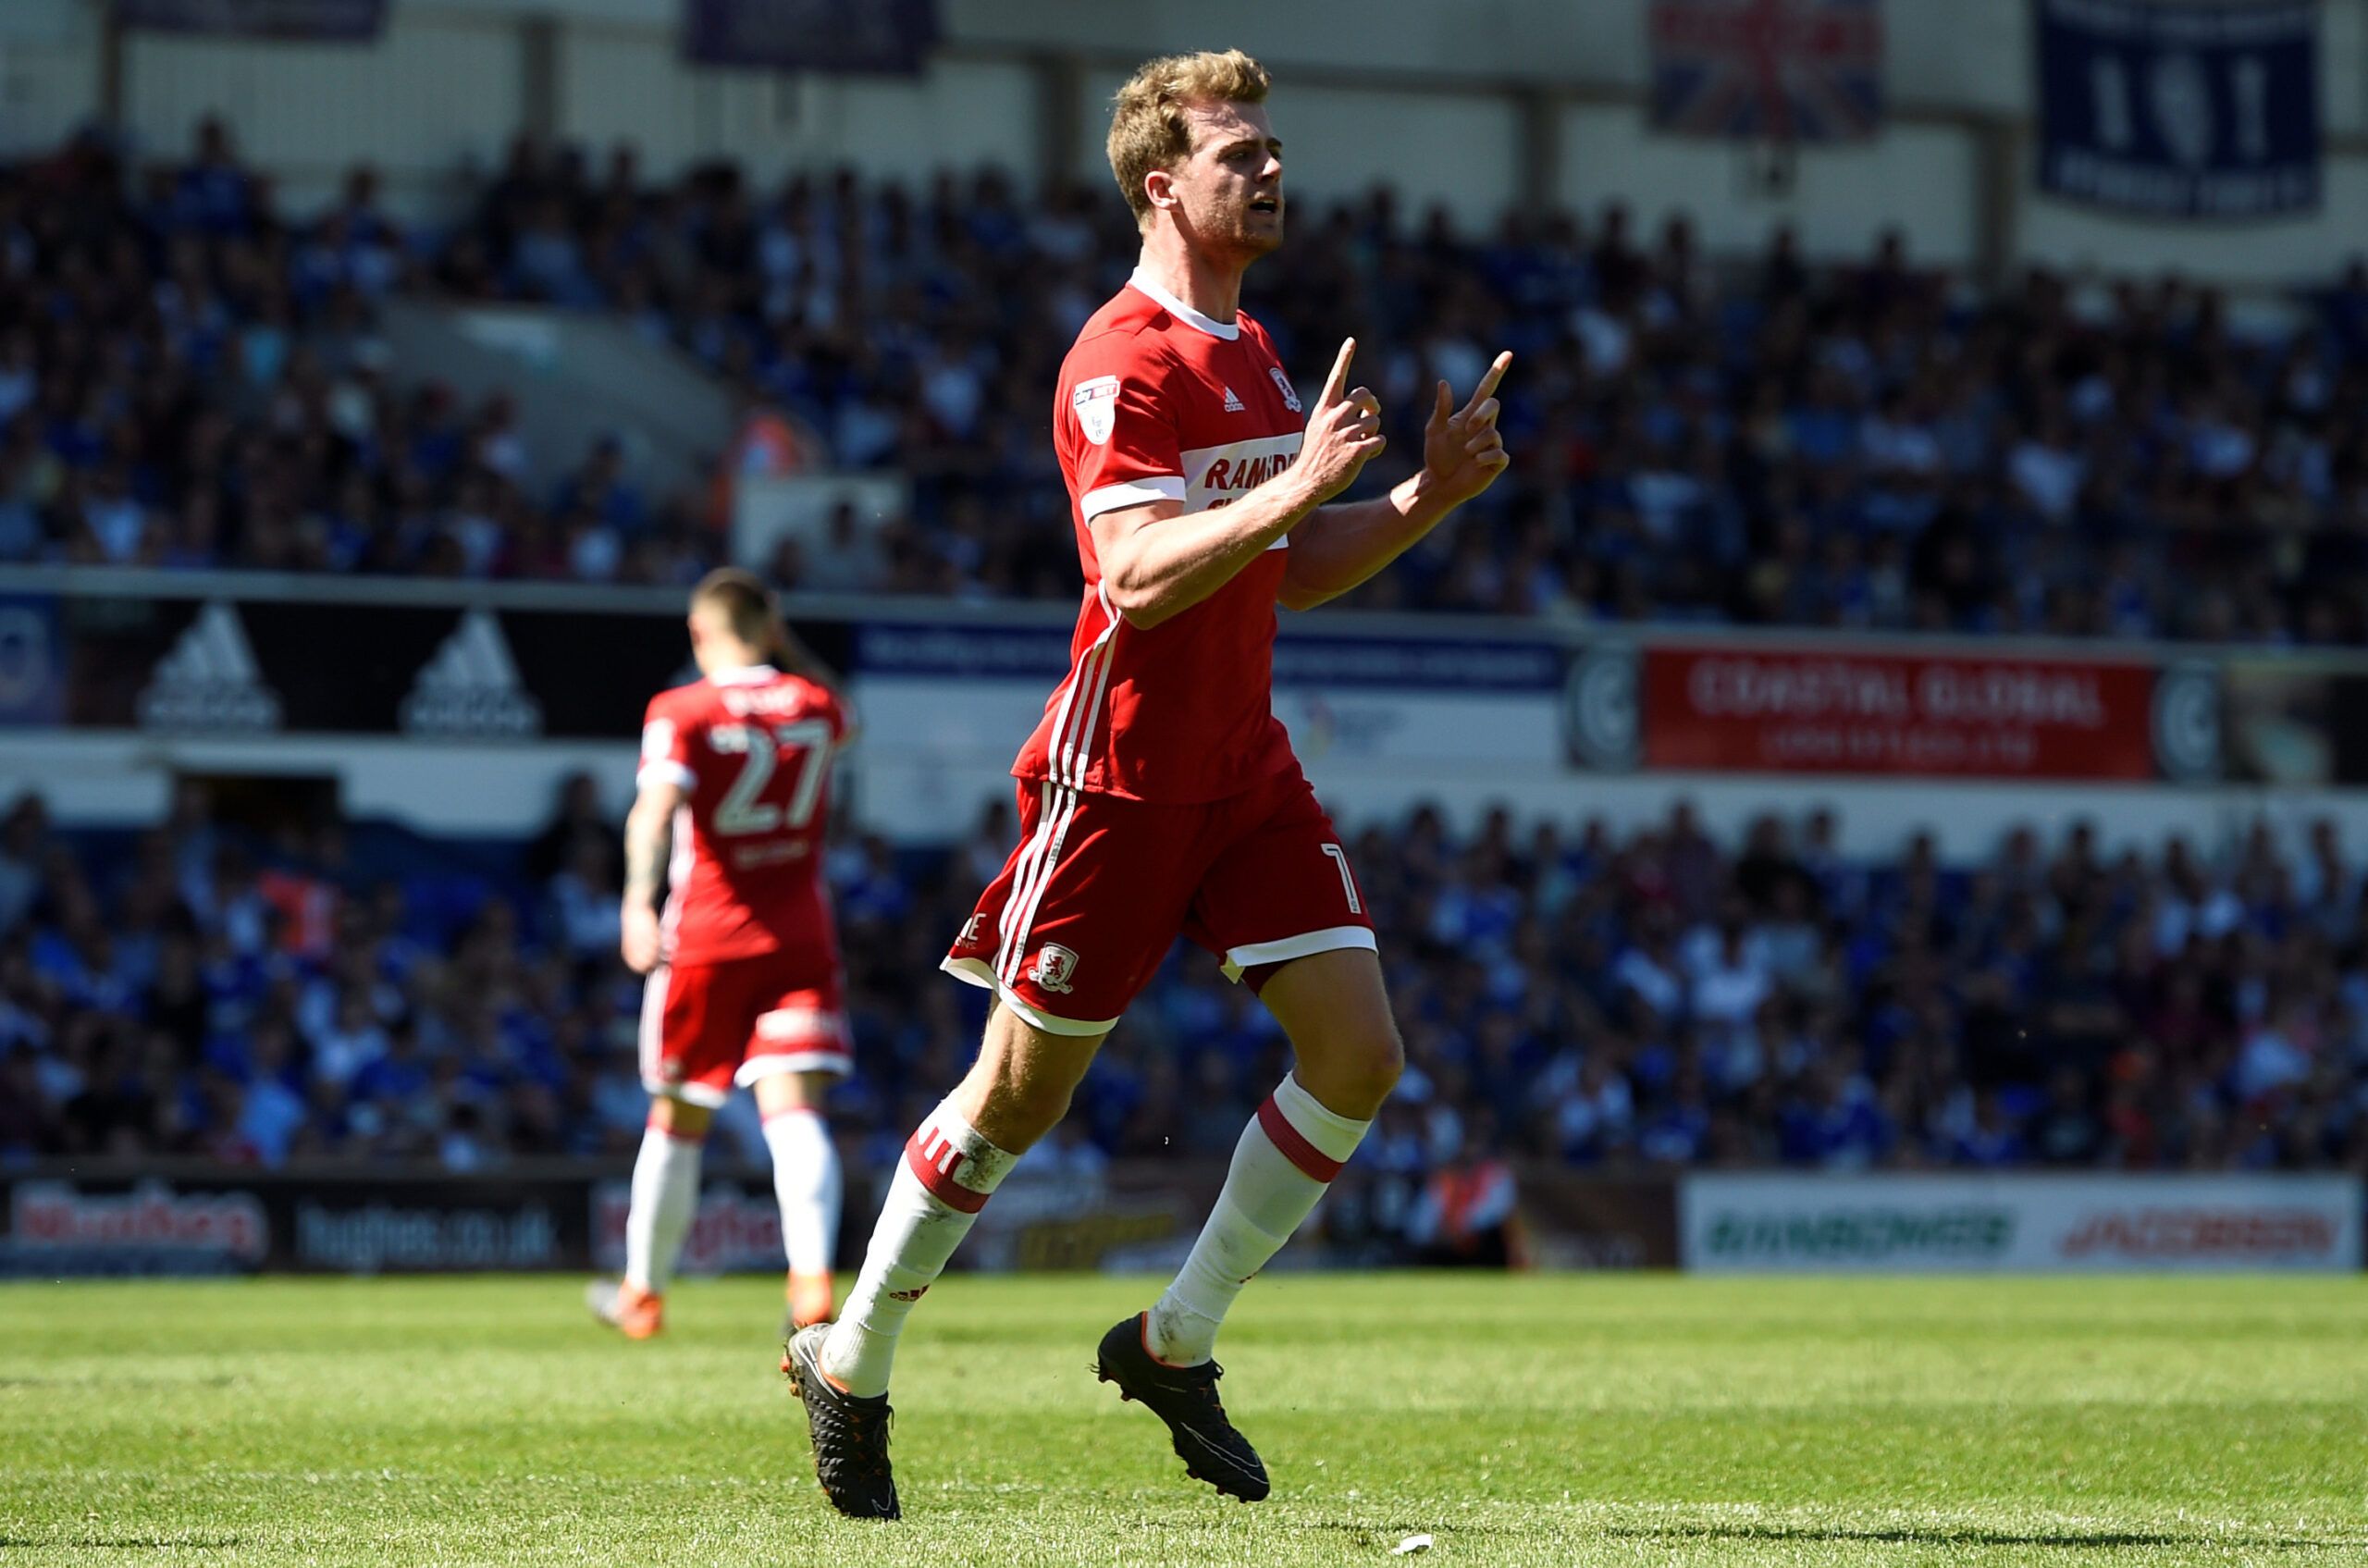 Soccer Football - Championship - Ipswich Town vs Middlesbrough - Portman Road, Ipswich, Britain - May 6, 2018  Middlesbrough's Patrick Bamford celebrates scoring their second goal  Action Images/Adam Holt  EDITORIAL USE ONLY. No use with unauthorized audio, video, data, fixture lists, club/league logos or 